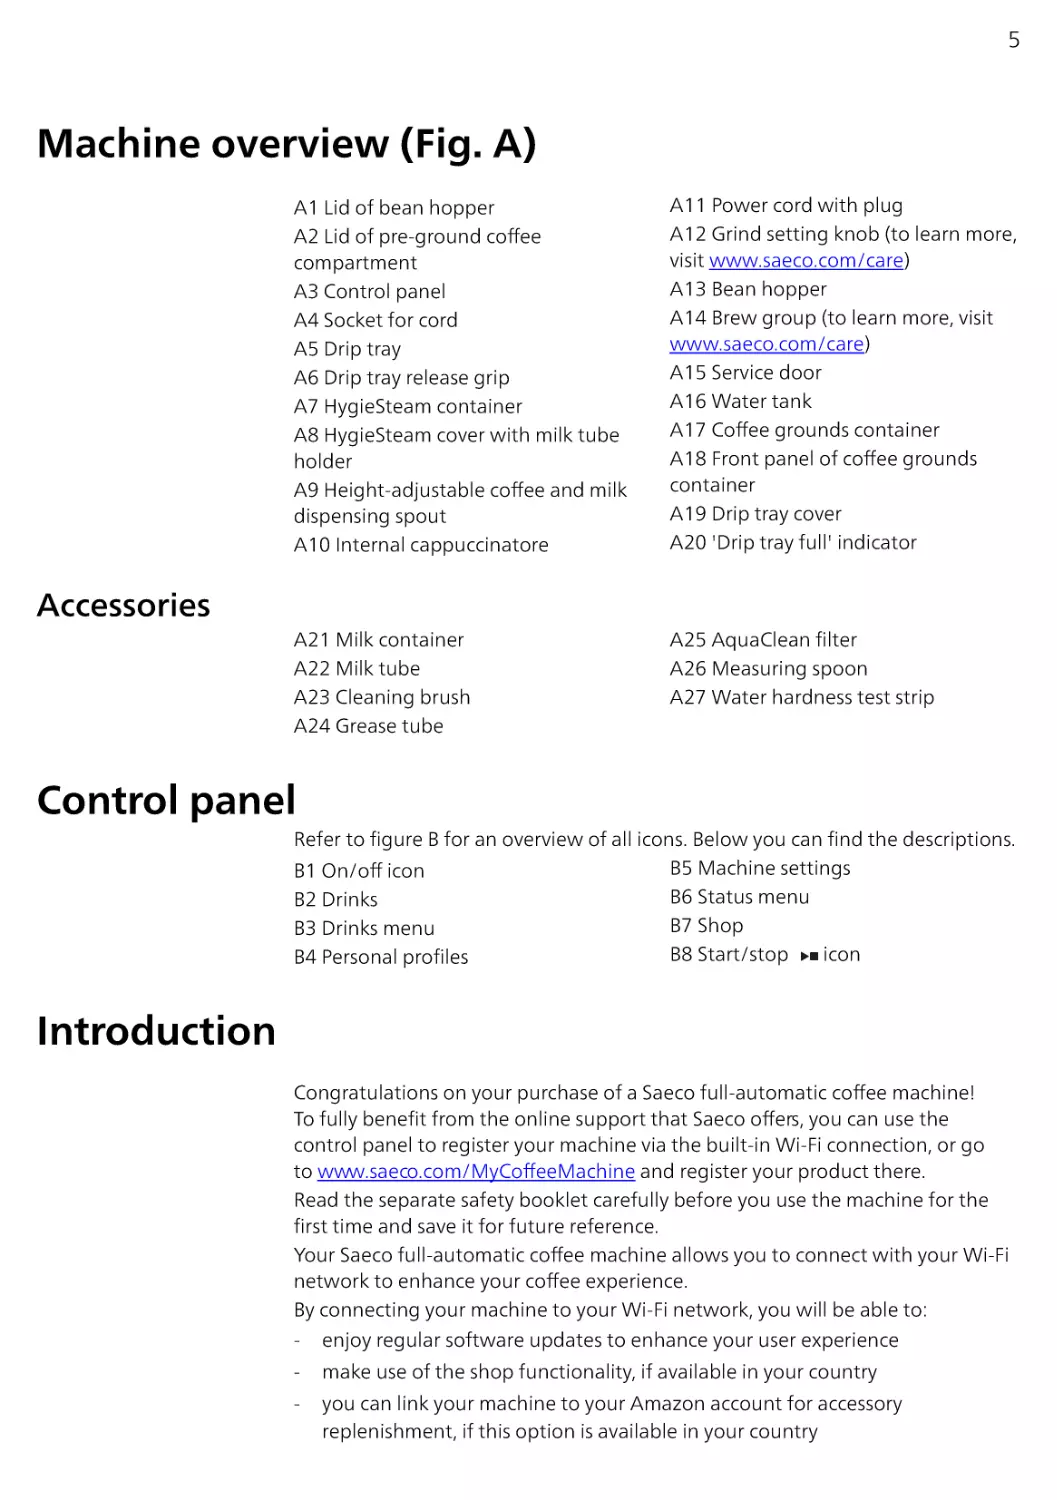 Machine overview (Fig. A)
Accessories
Control panel
Introduction